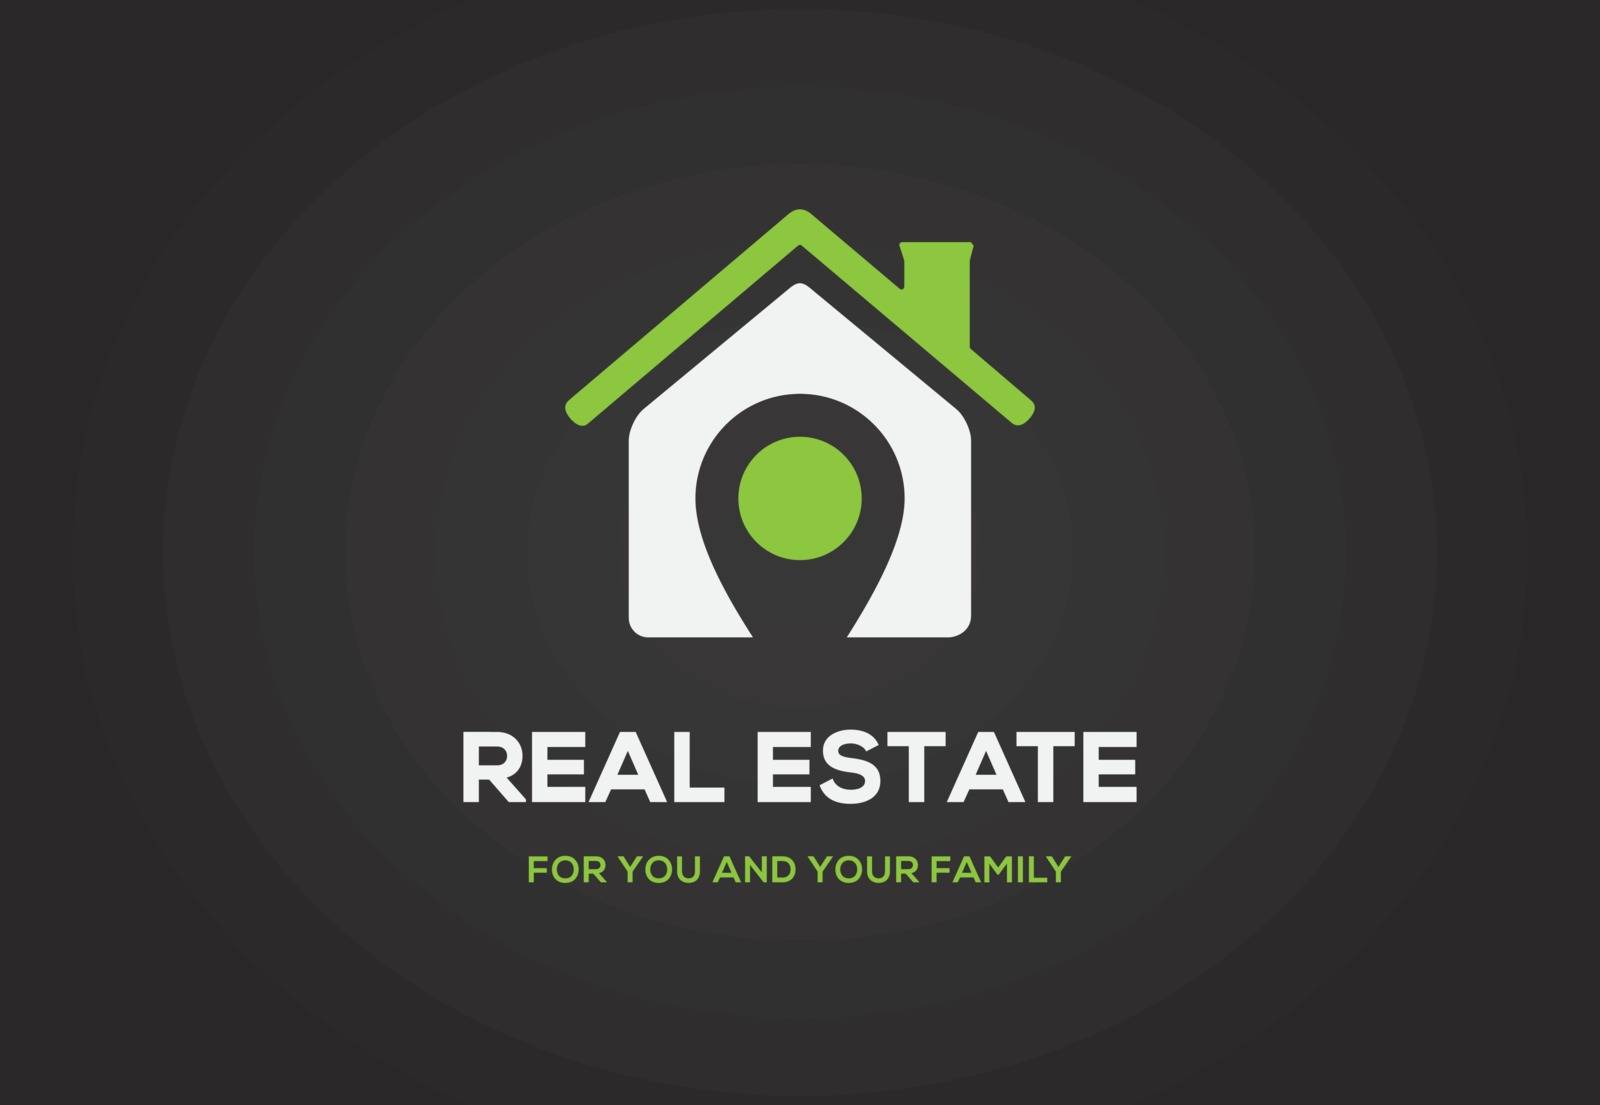 Template logo for real estate agency or cottage town elite class by ckybes